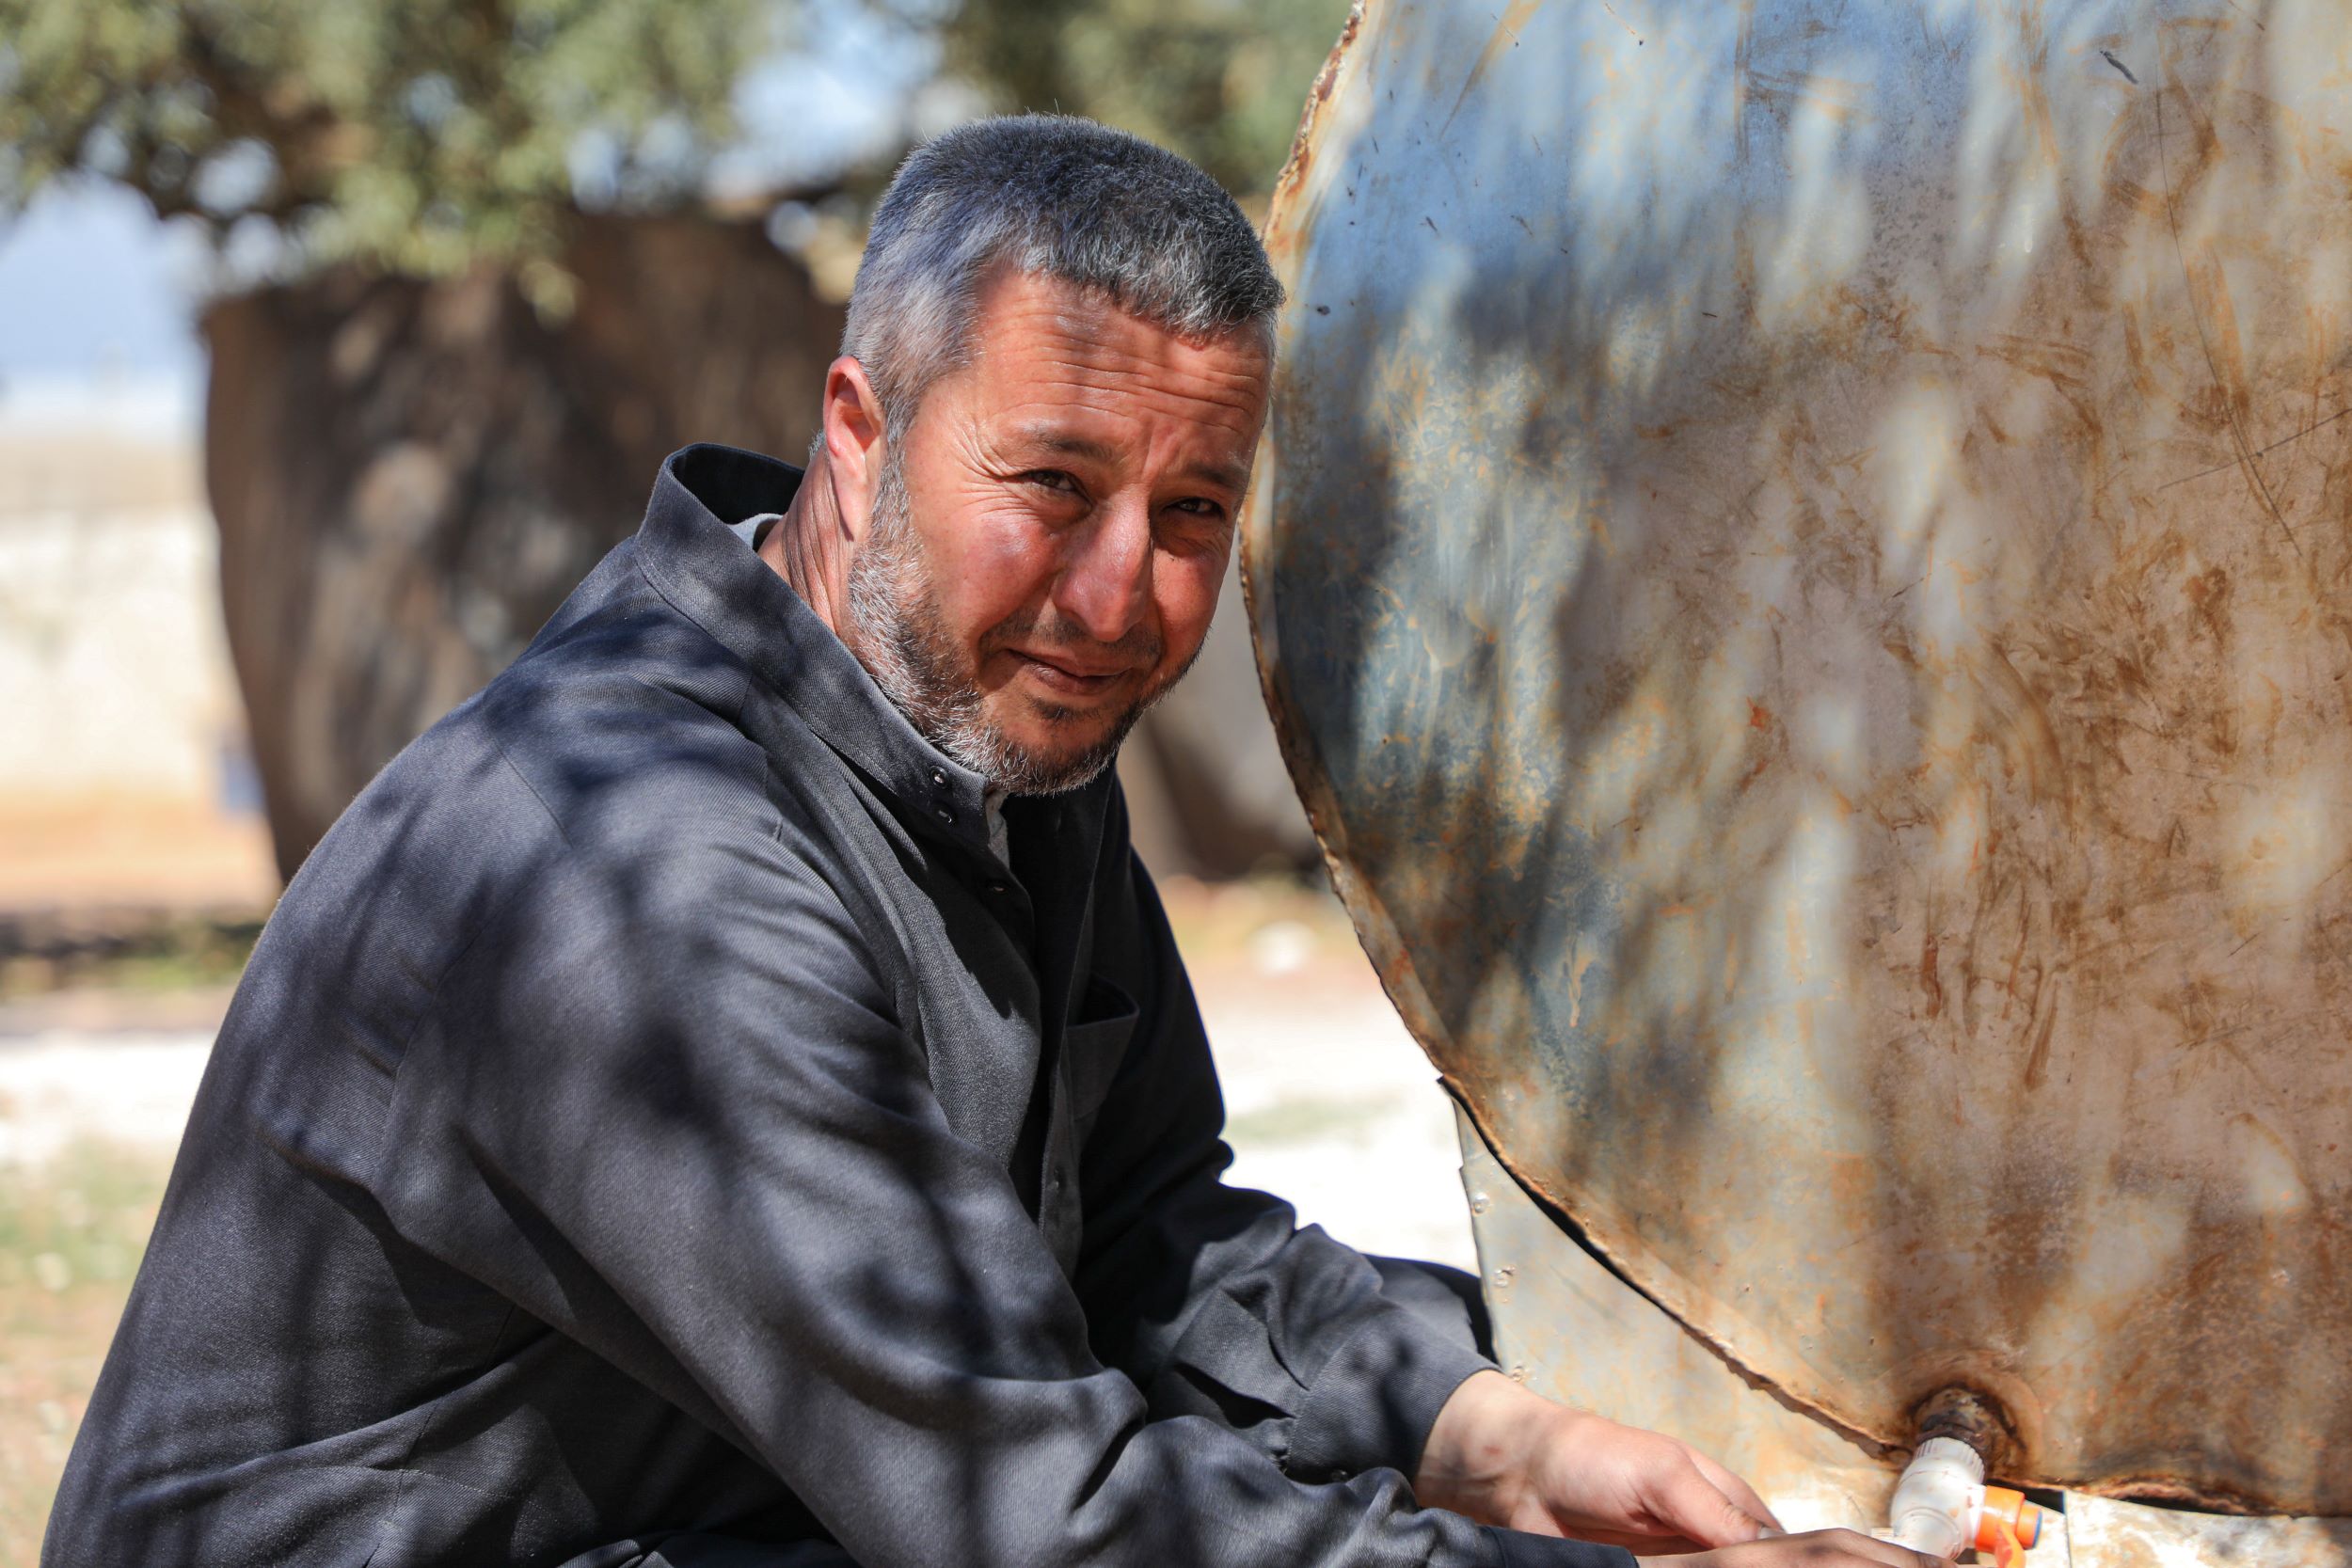  Syrian man collecting water for his family, Northwest Syria